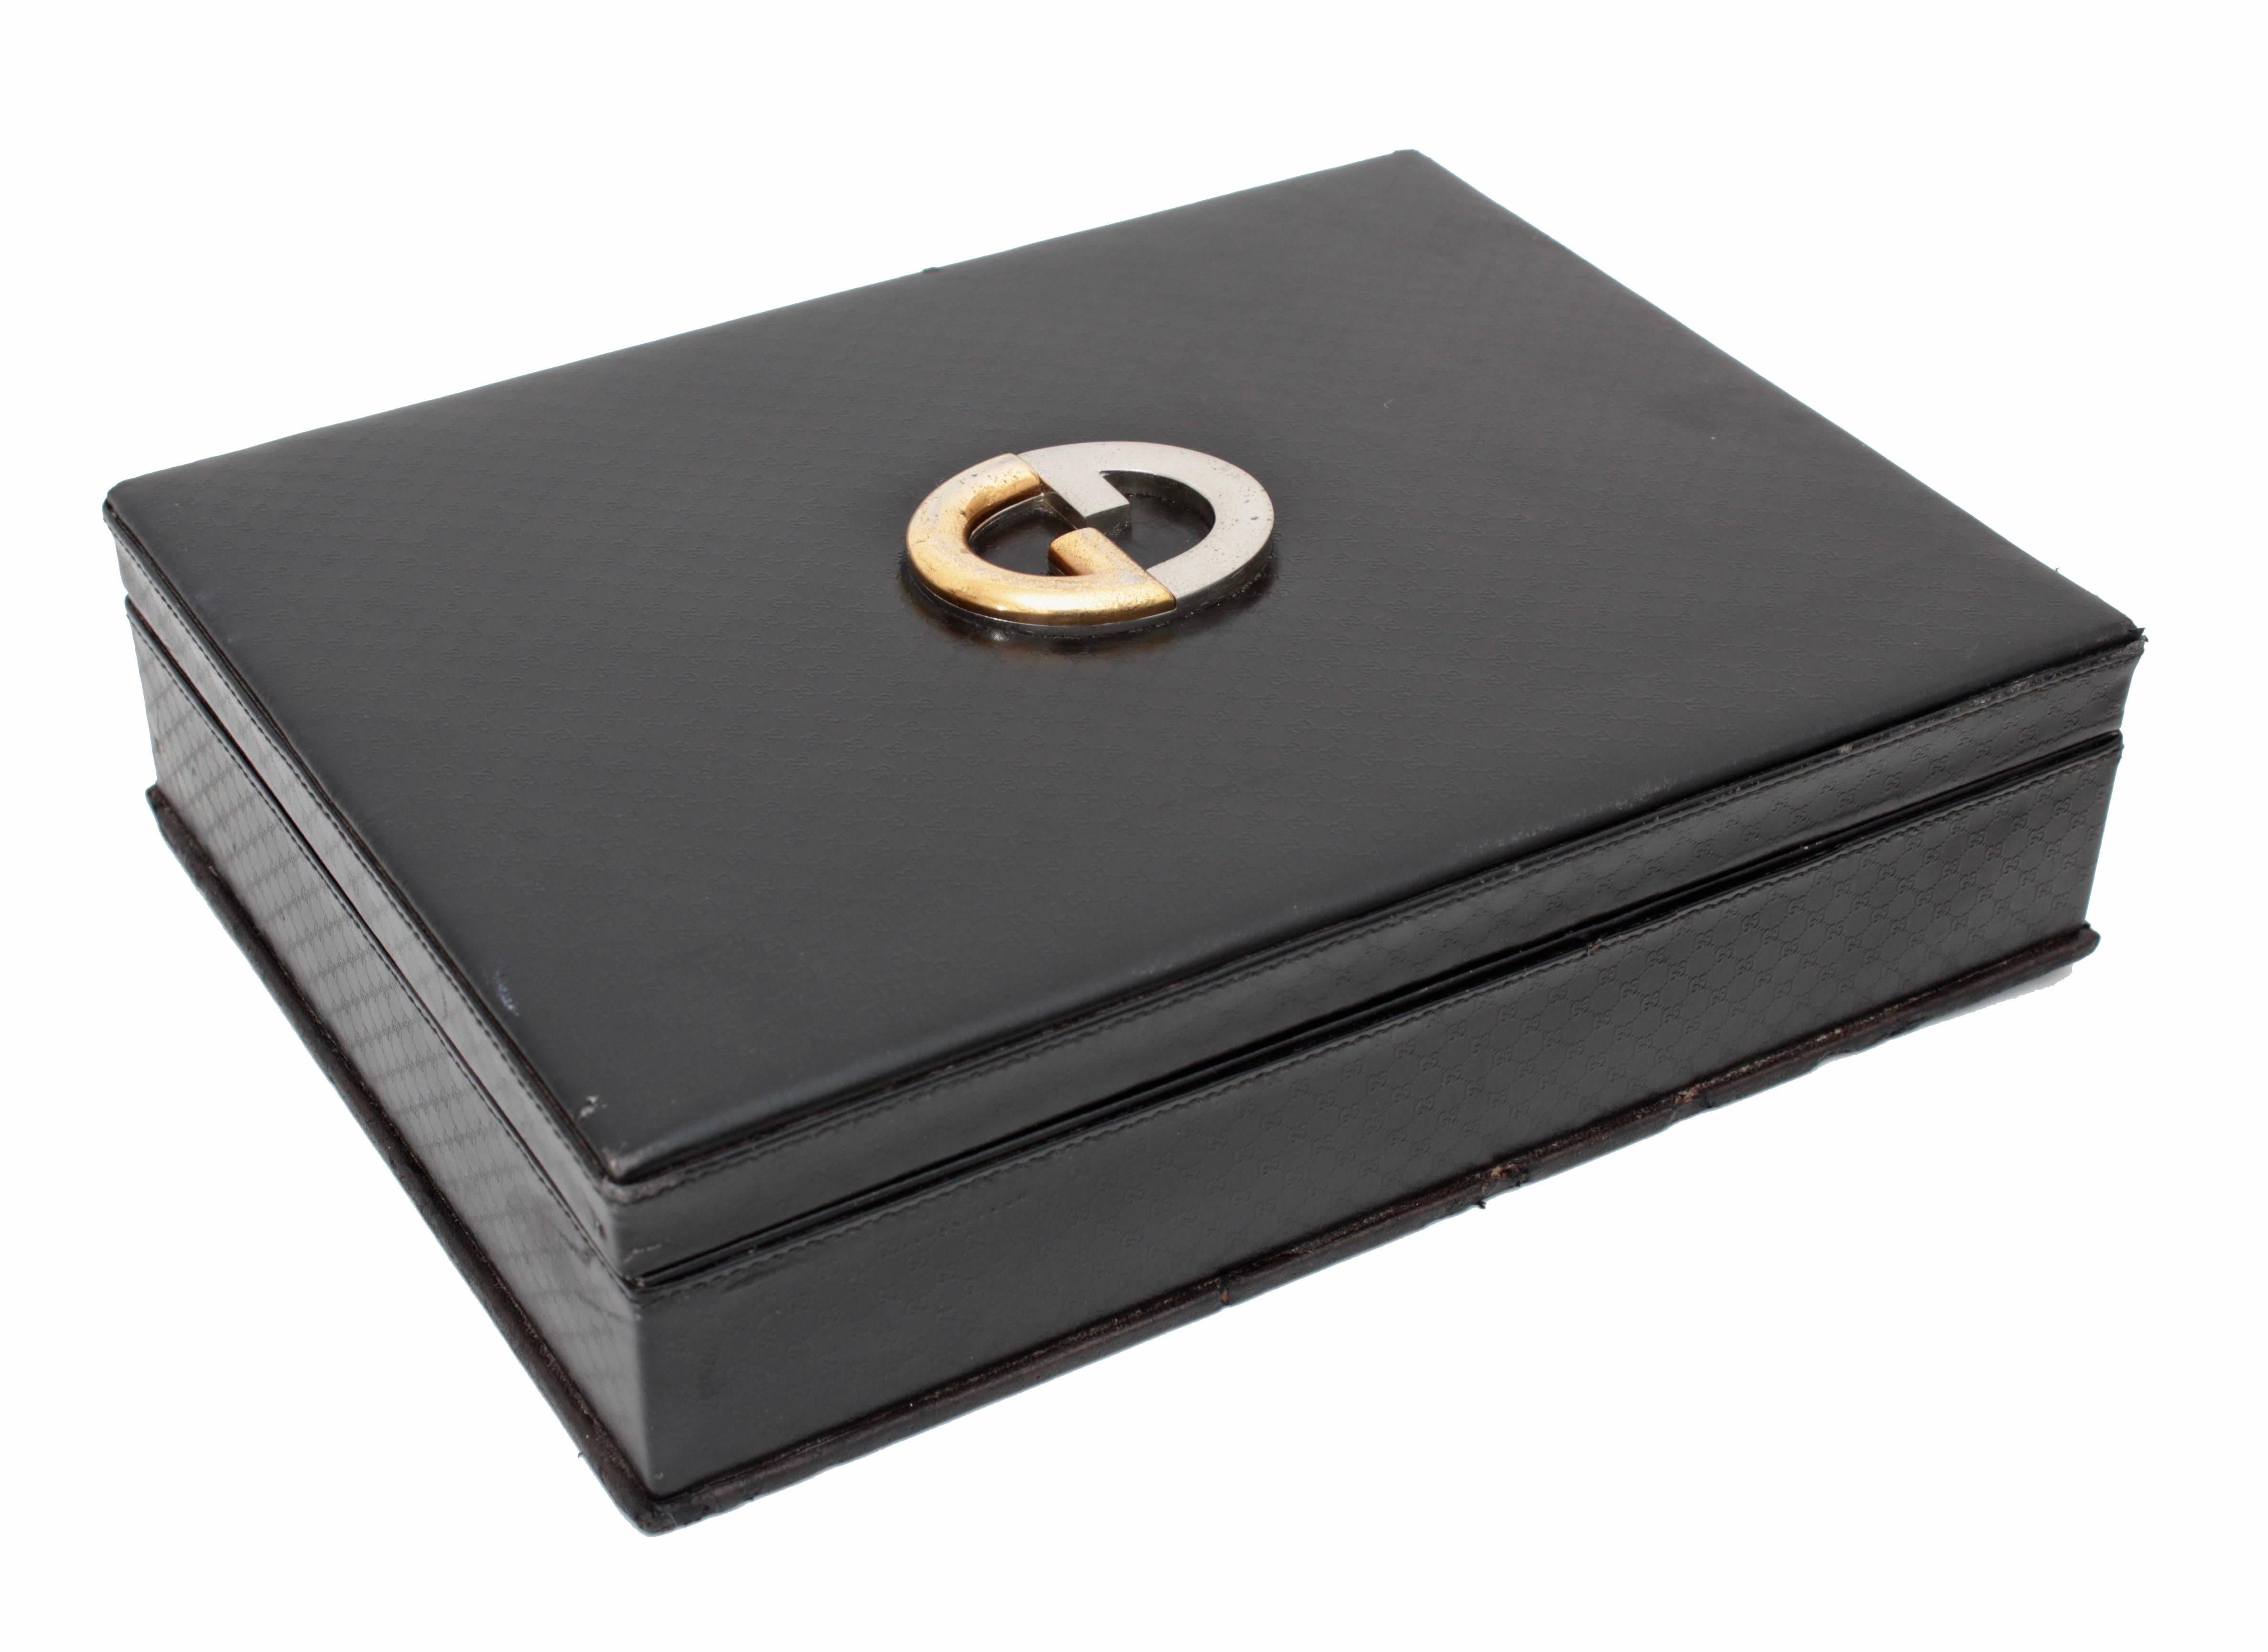 This vintage game case was made by Gucci, most likely in the early 1970s,  Made from black leather embossed with their GG logo, it features the Gucci logo in gold and silver on top.  The interior is lined in green felt and comes with Gucci playing